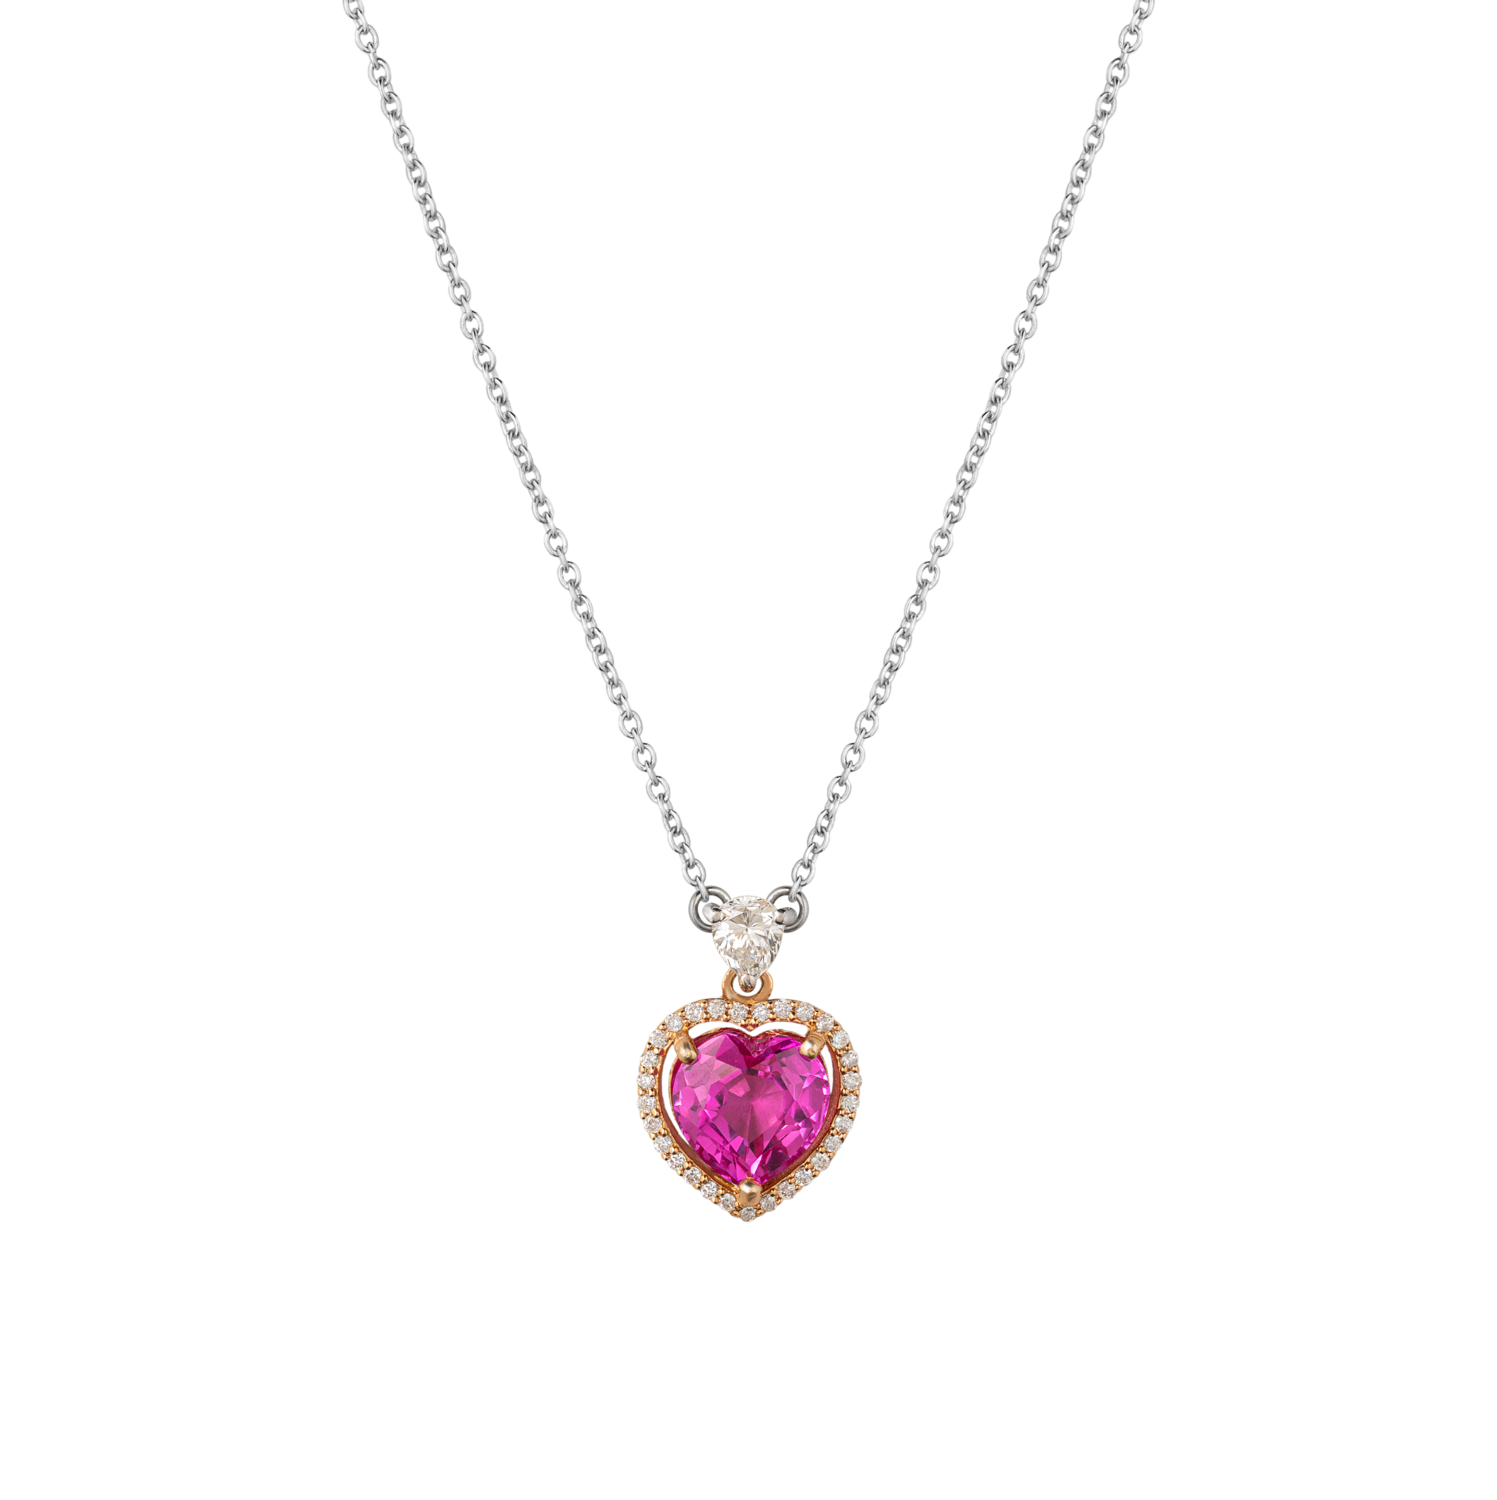 Eternal Heart Necklace with Colored Stones and Pearl